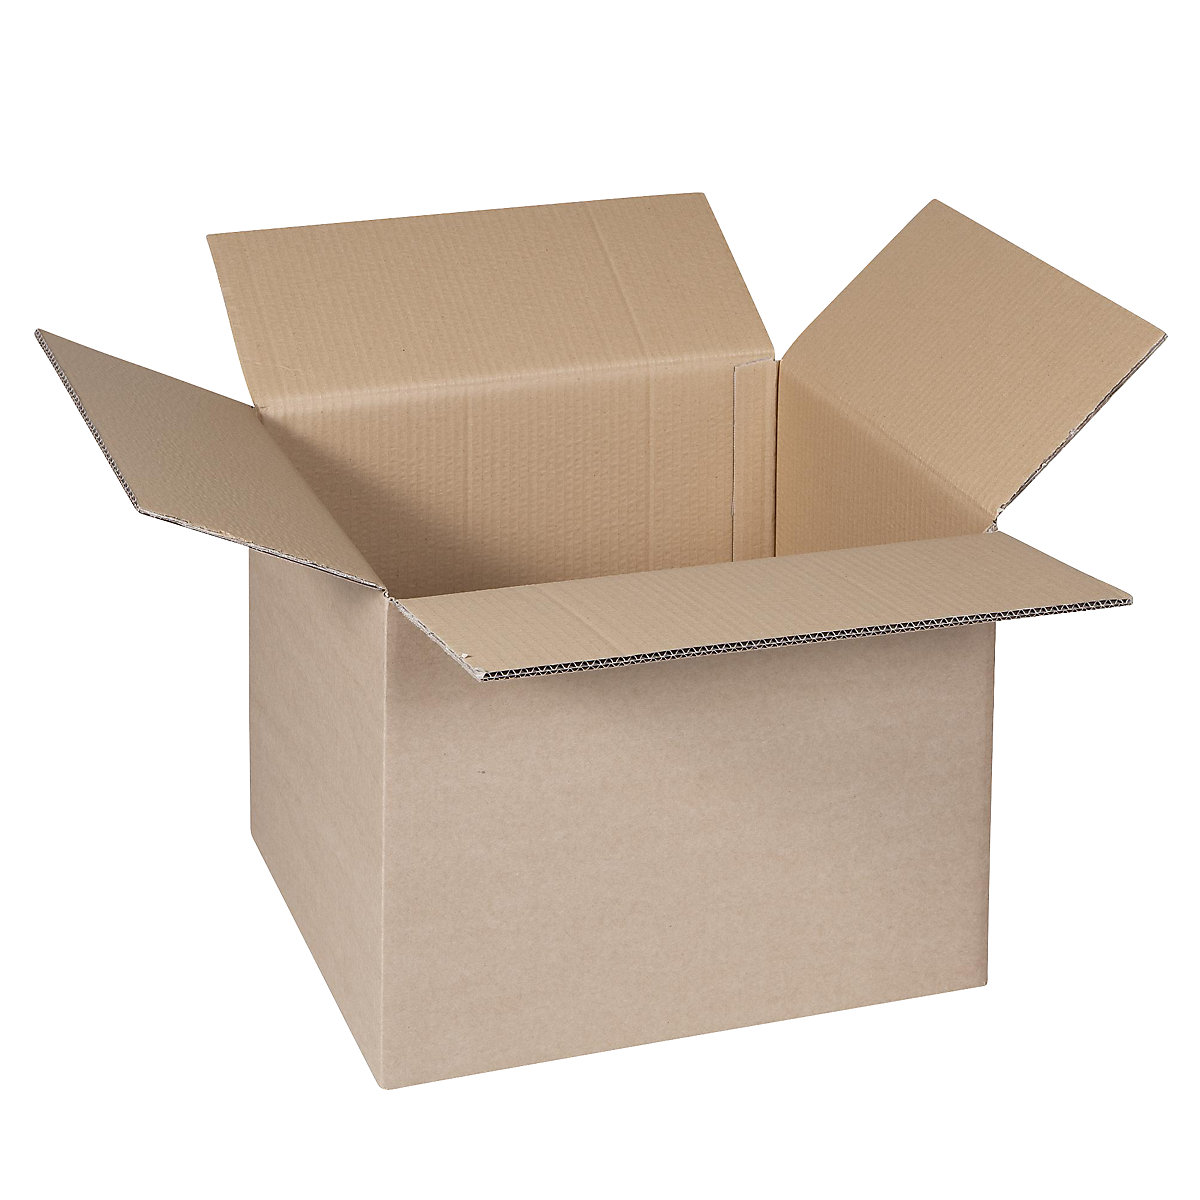 Folding cardboard box, FEFCO 0201, made of double fluted cardboard, internal dimensions 430 x 350 x 315 mm, pack of 100-2